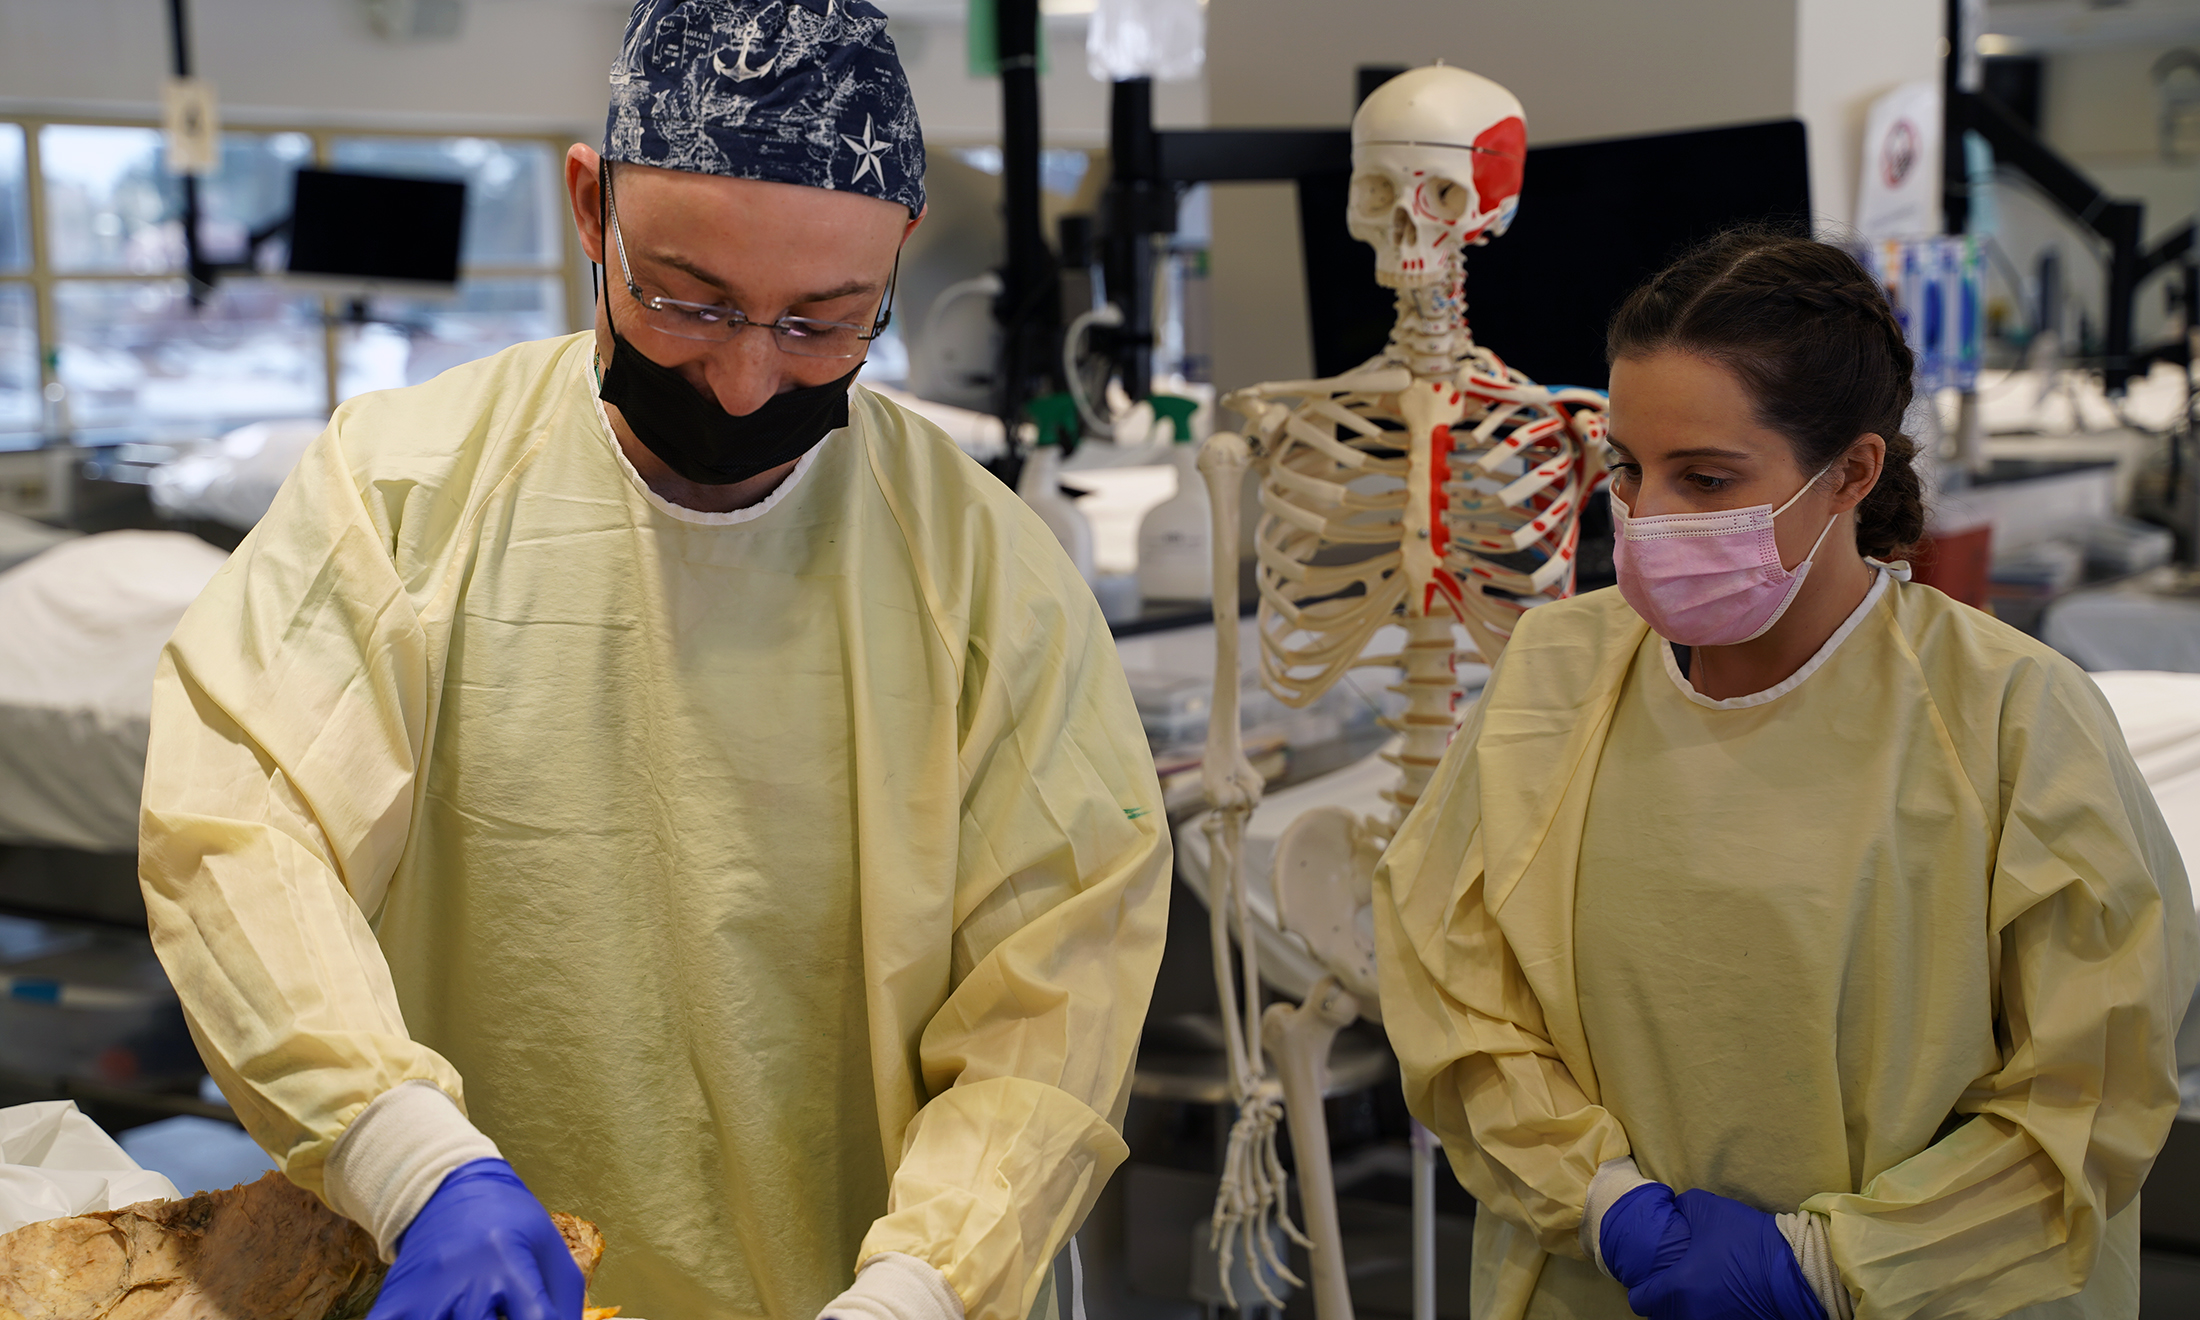 An image of a surgeon teaching a student in OUWB's anatomy lab.